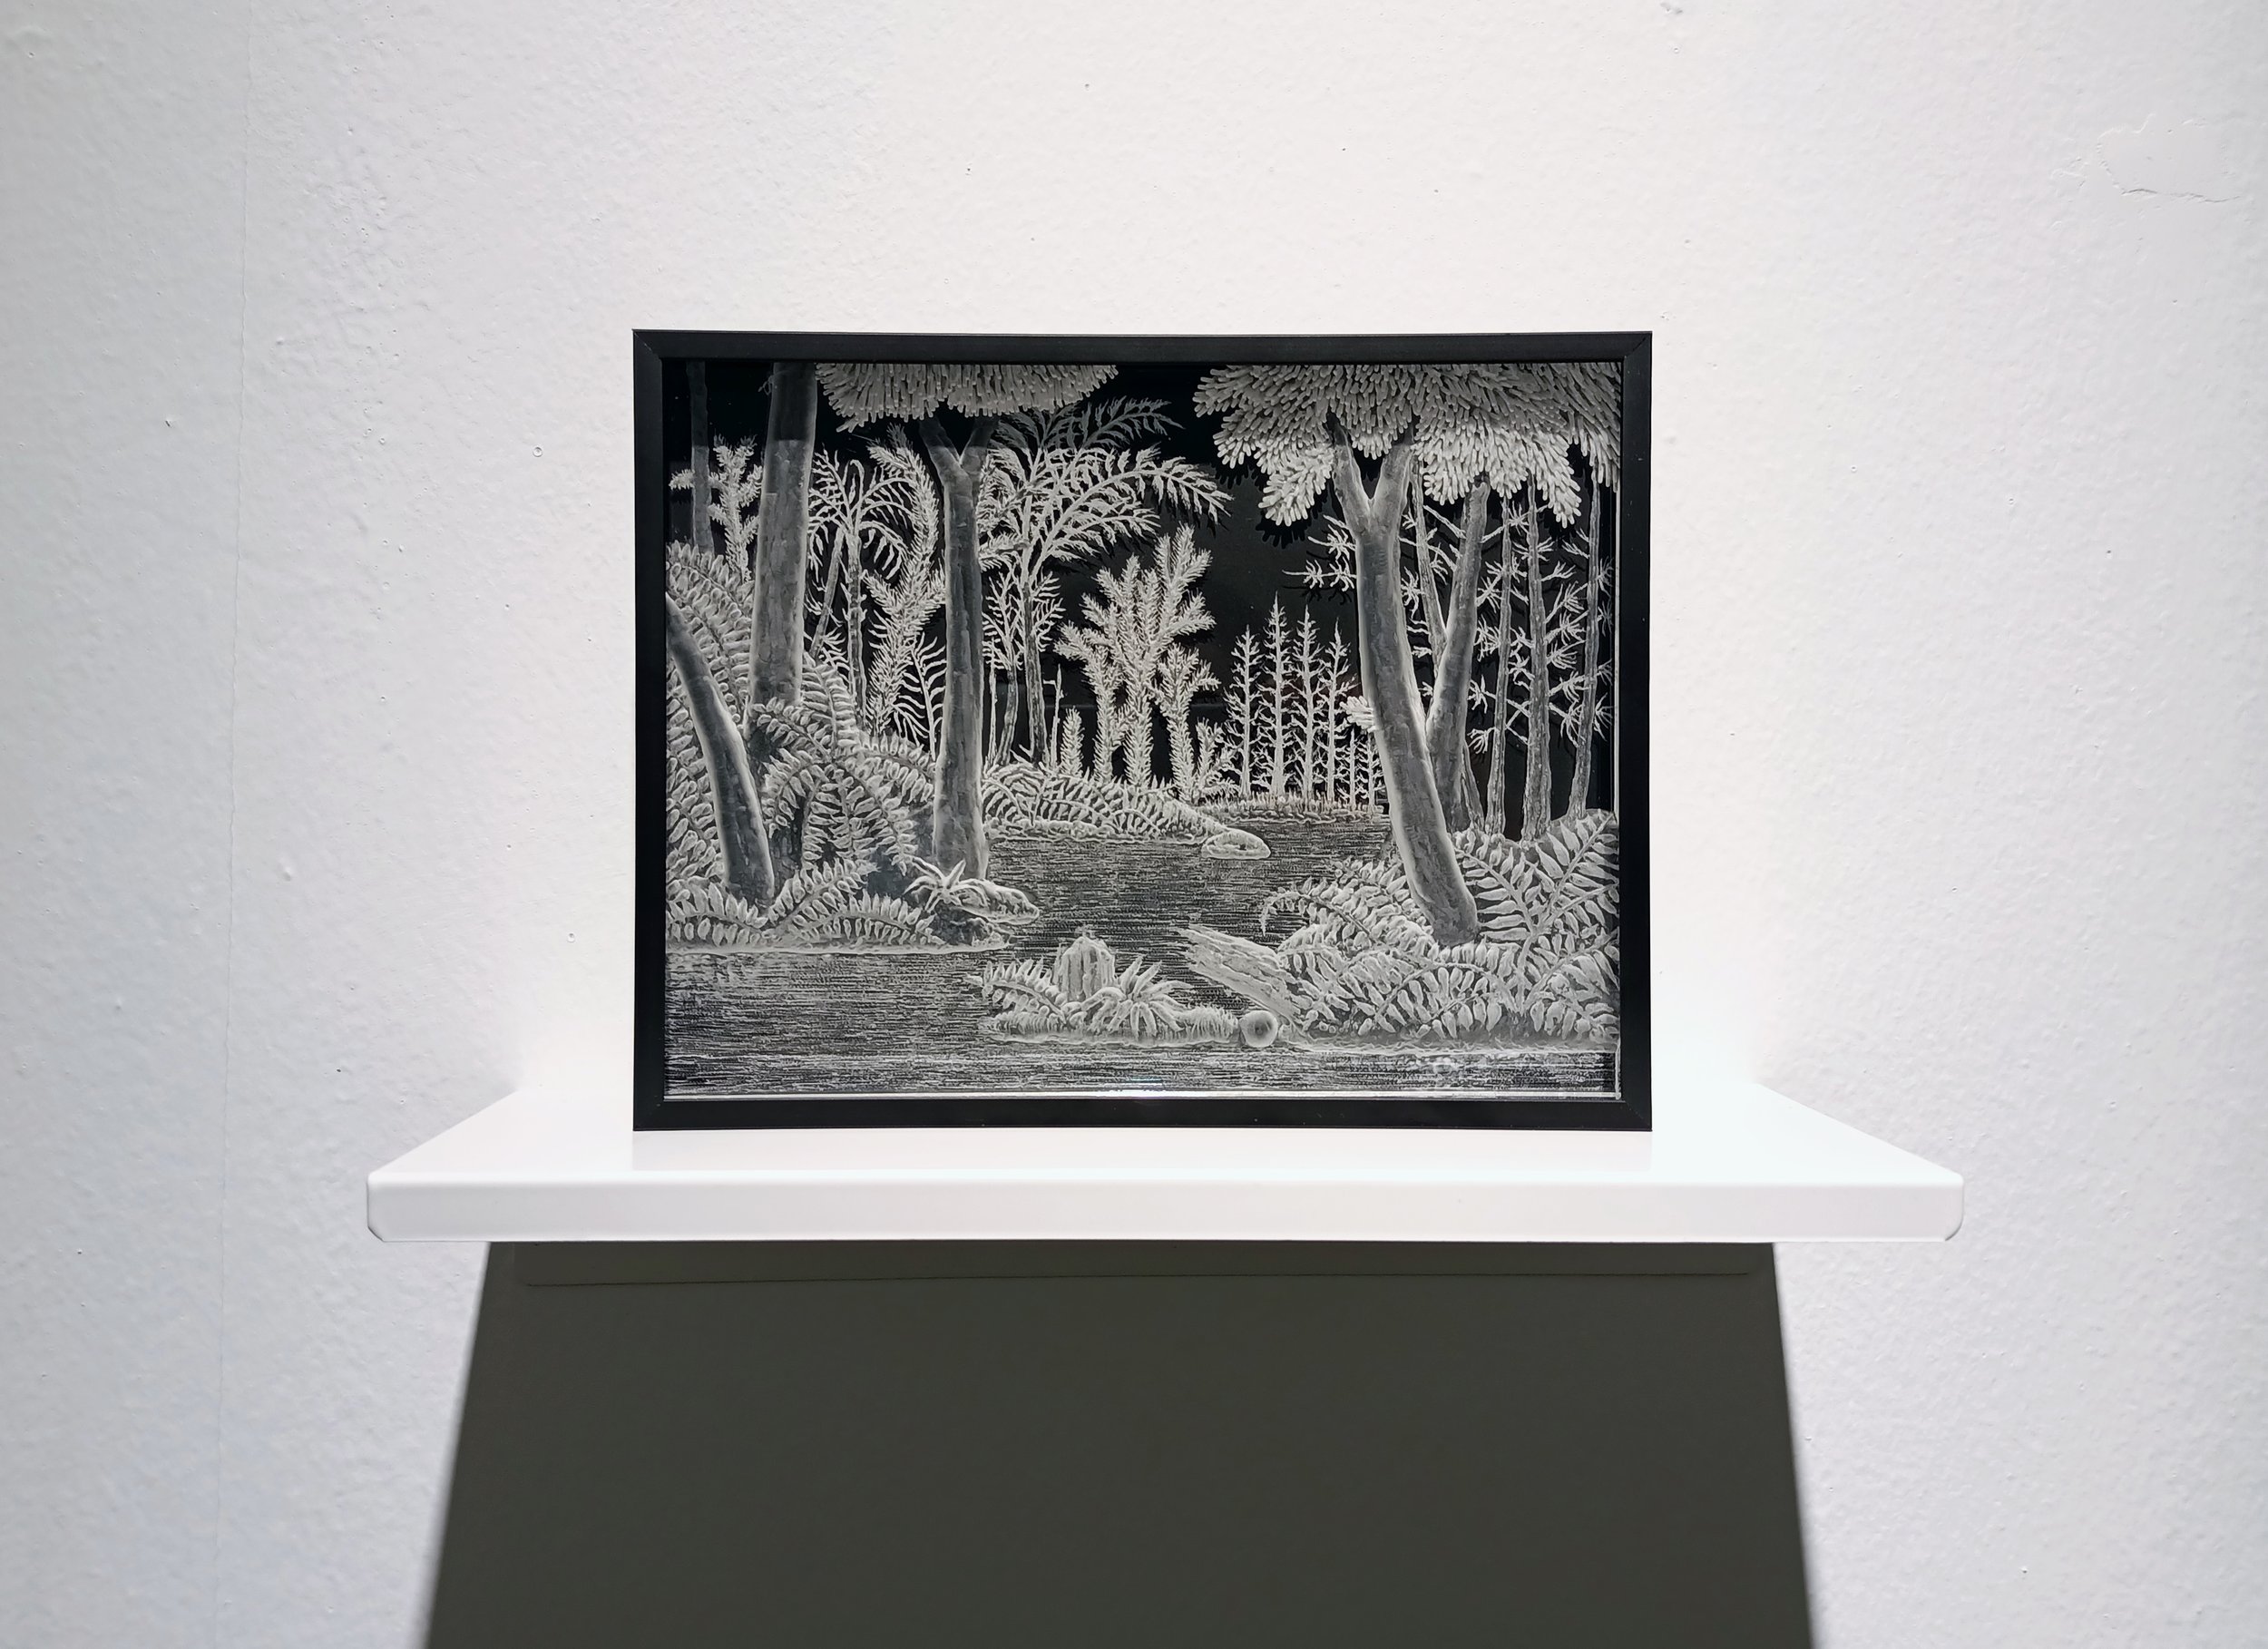 Donna ONG, Somewhere Else-The Heart of Darkness (Joseph Conrad), 2022, Engraving on acrylic with metal frame, H16.6 x W21.5 x D5 cm (frame).jpg